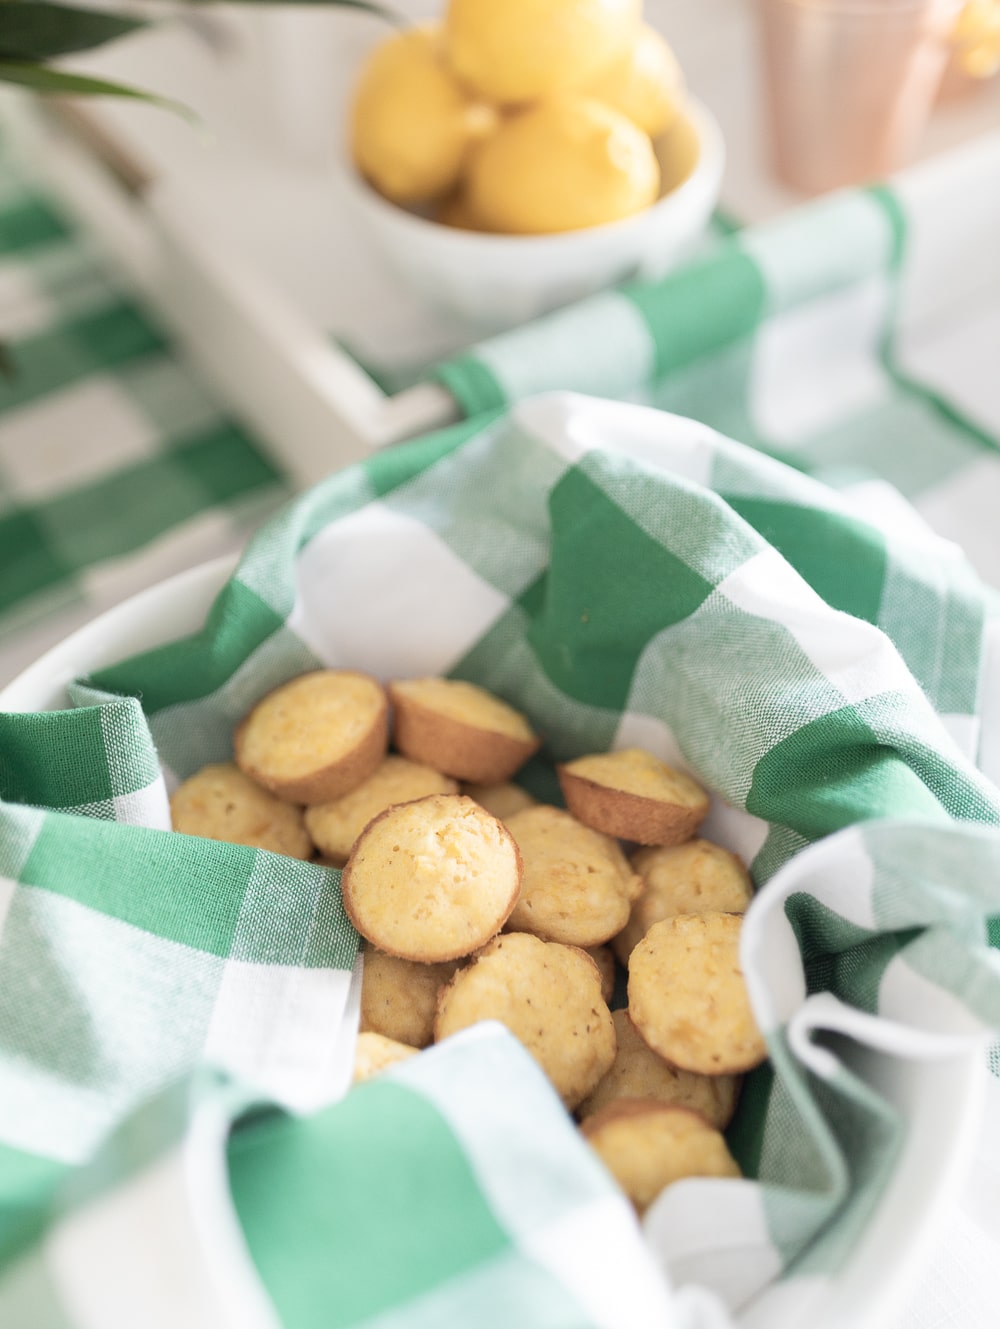 Mini cornbread muffins made by southern blogger Stephanie Ziajka on Diary of a Debutante